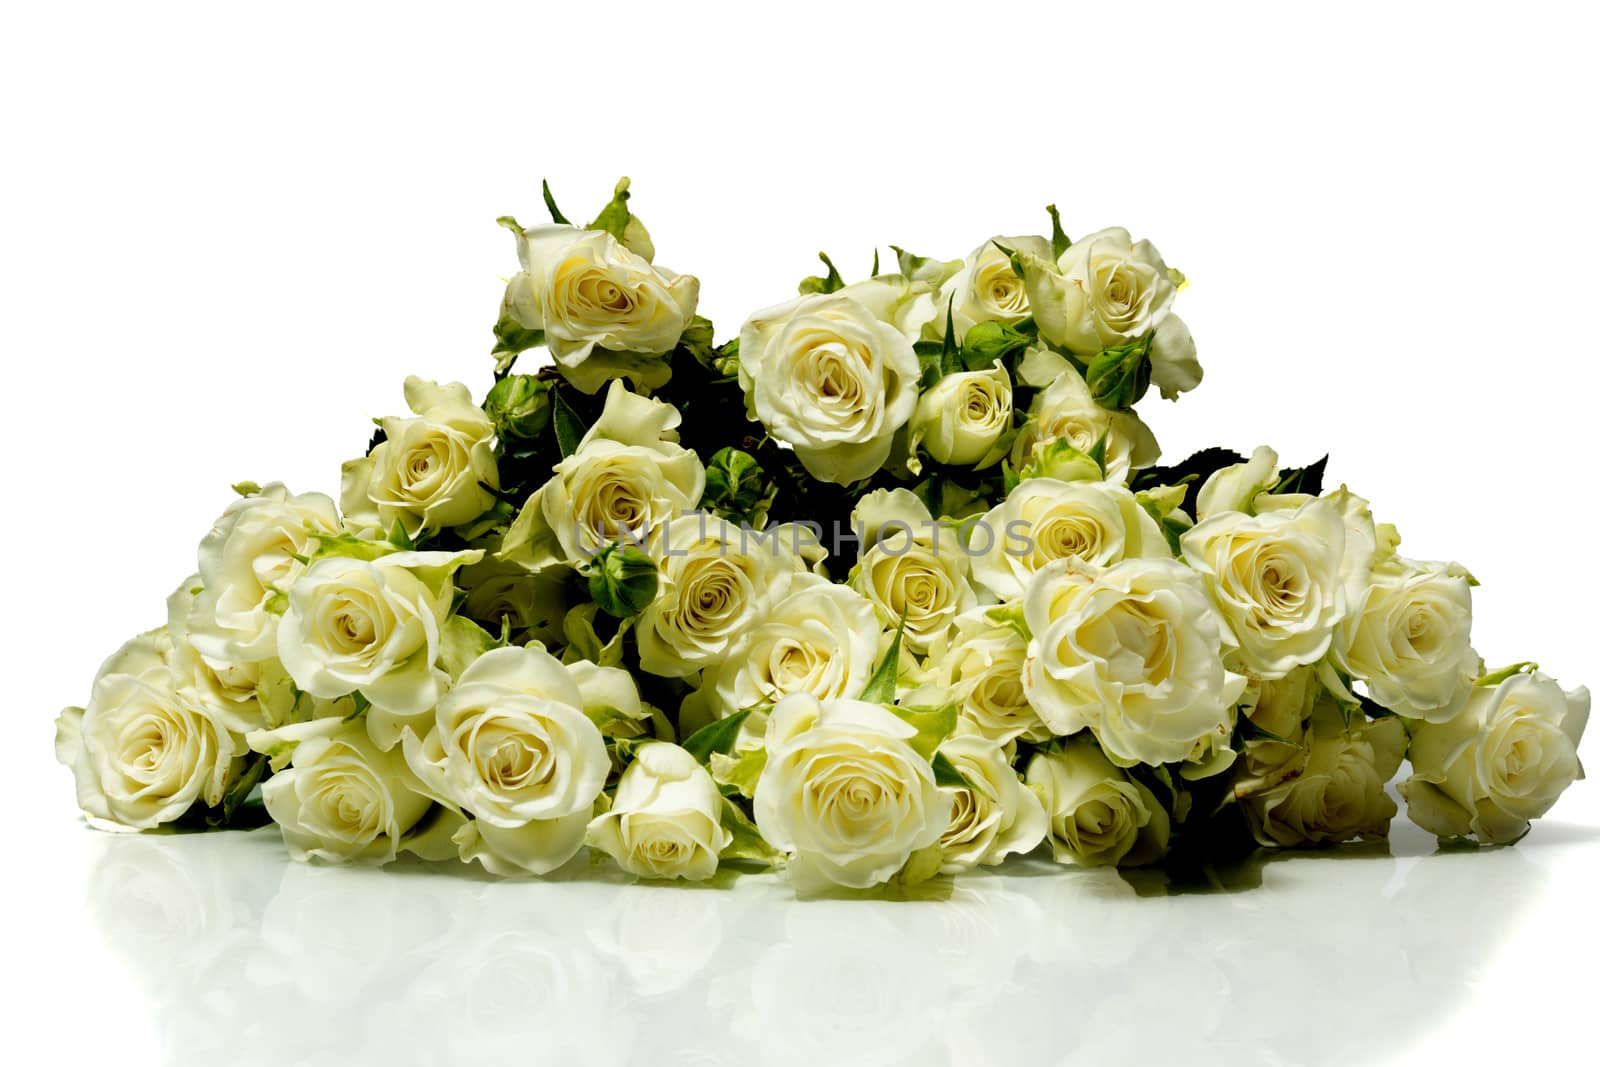 The photo shows roses on a white background